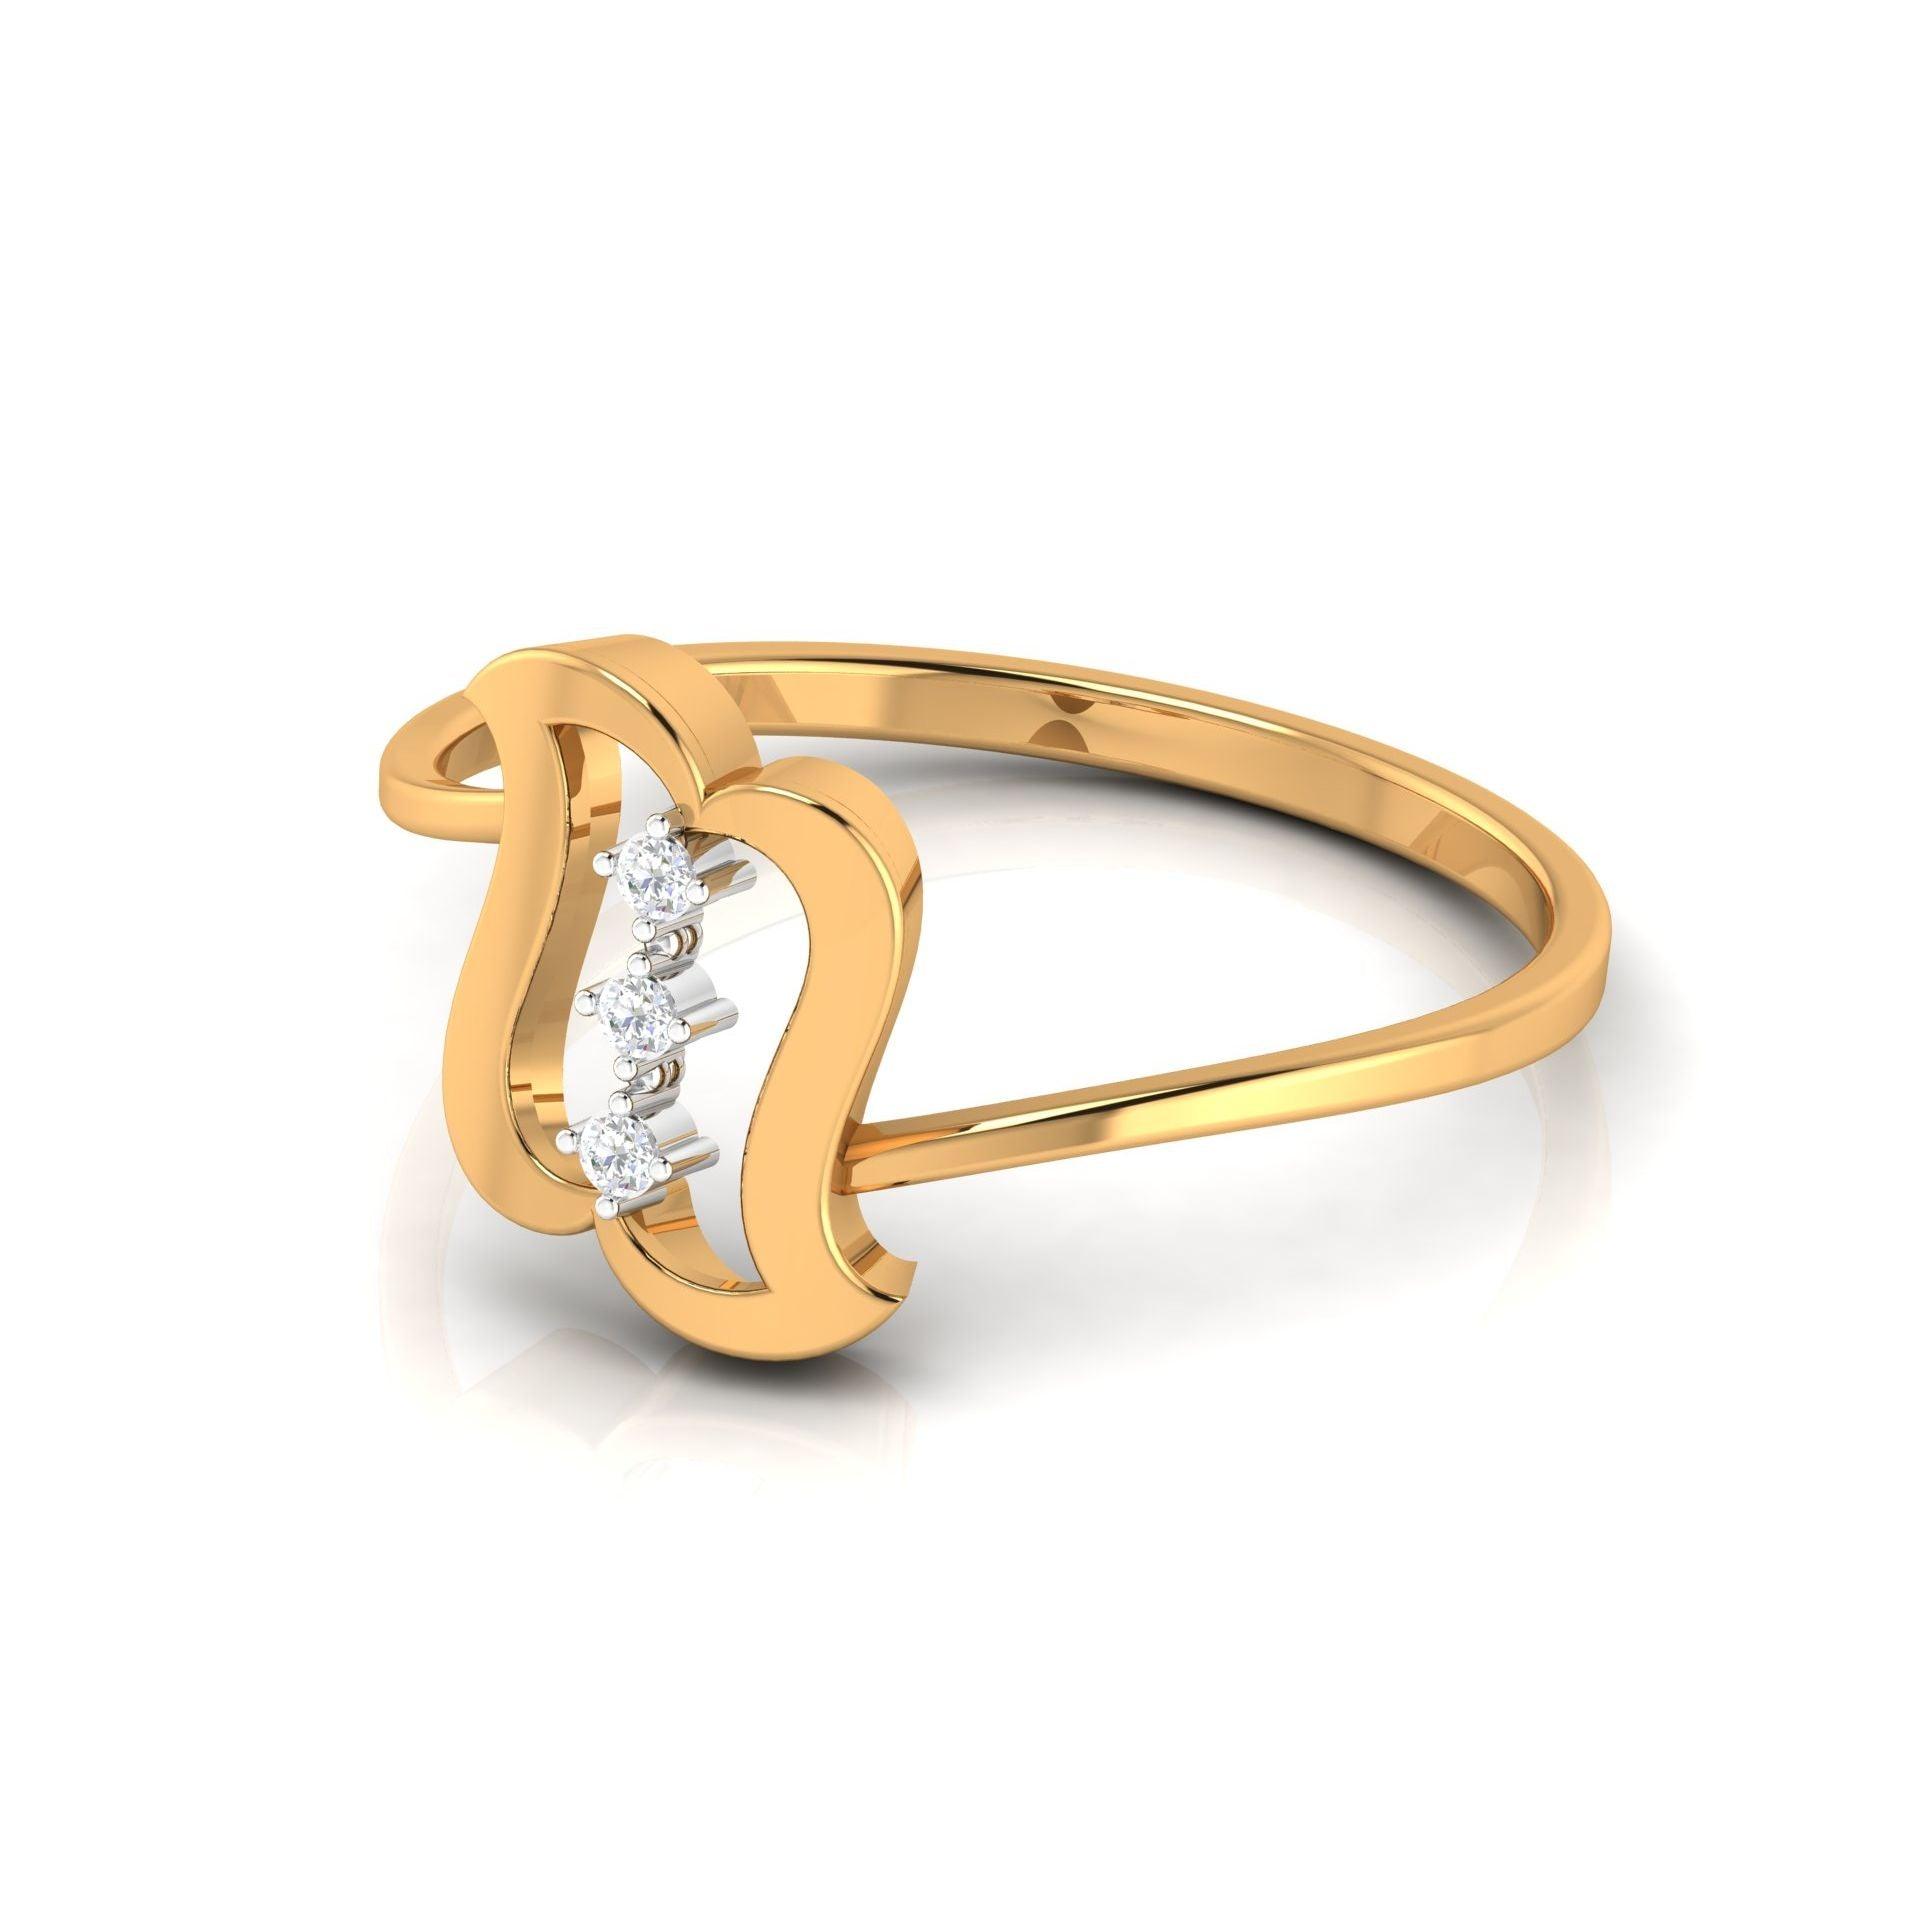 925 Sterling Silver Classic Treasures with Antique Appeal Gold-Plated Ring AUS-368 - Auory